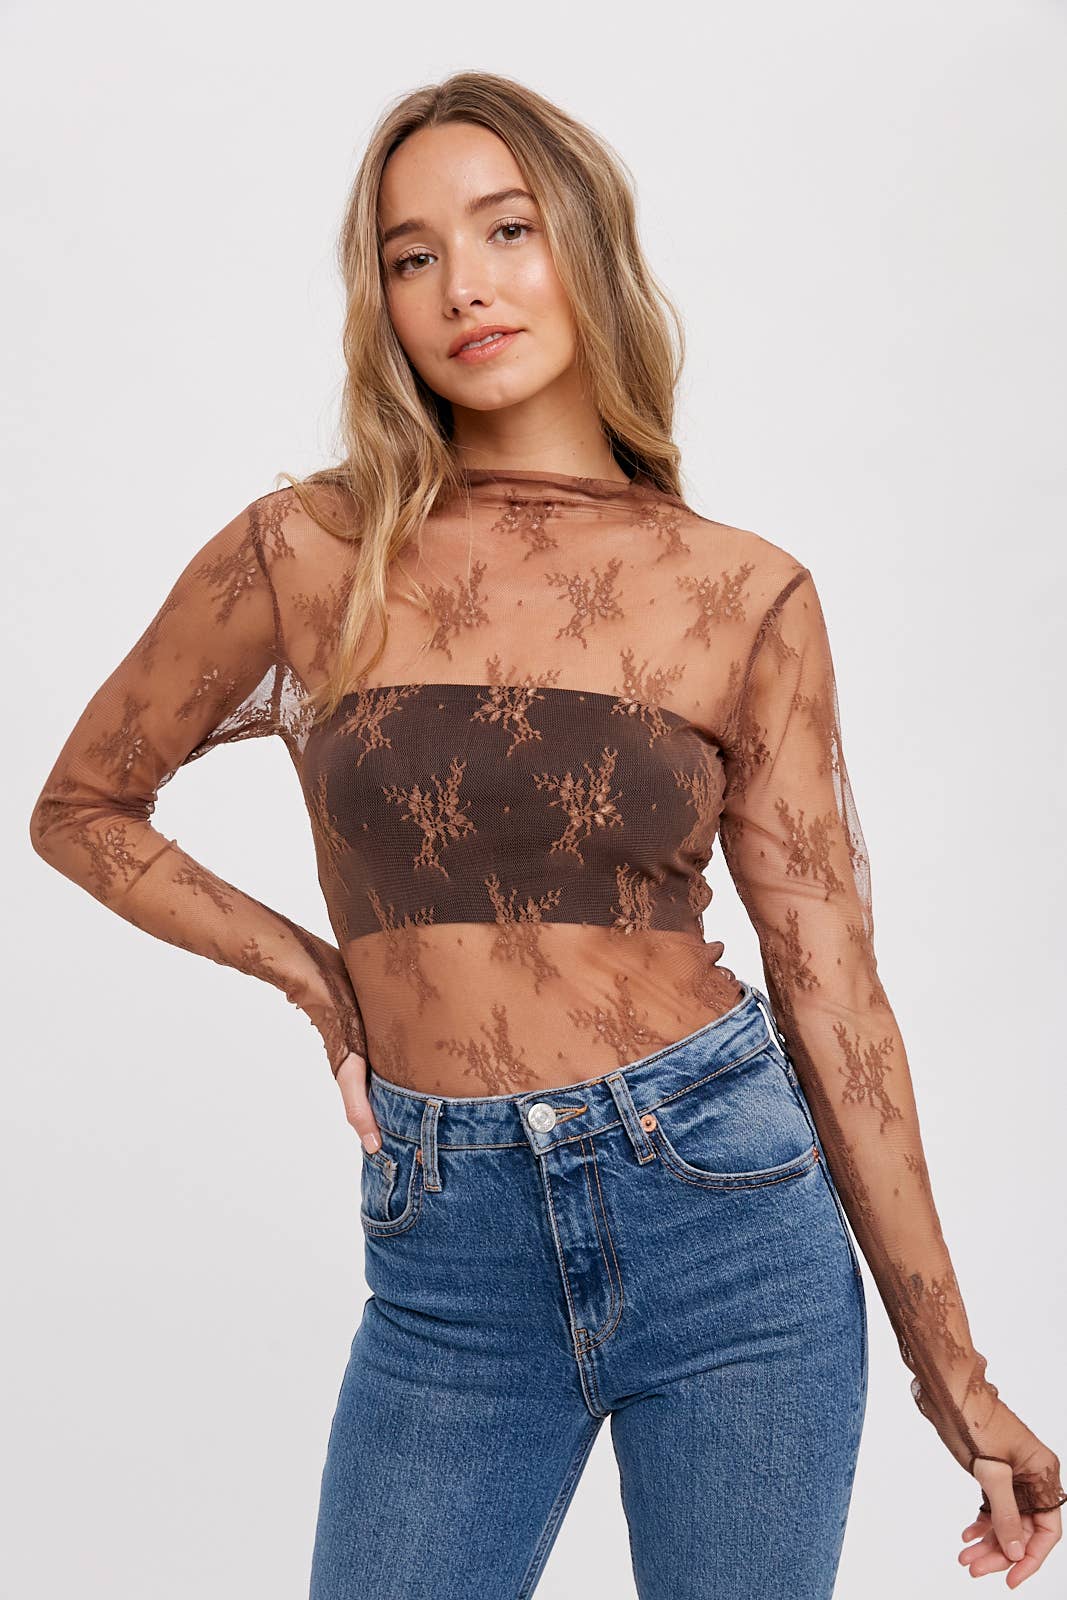 Lace mesh layering top